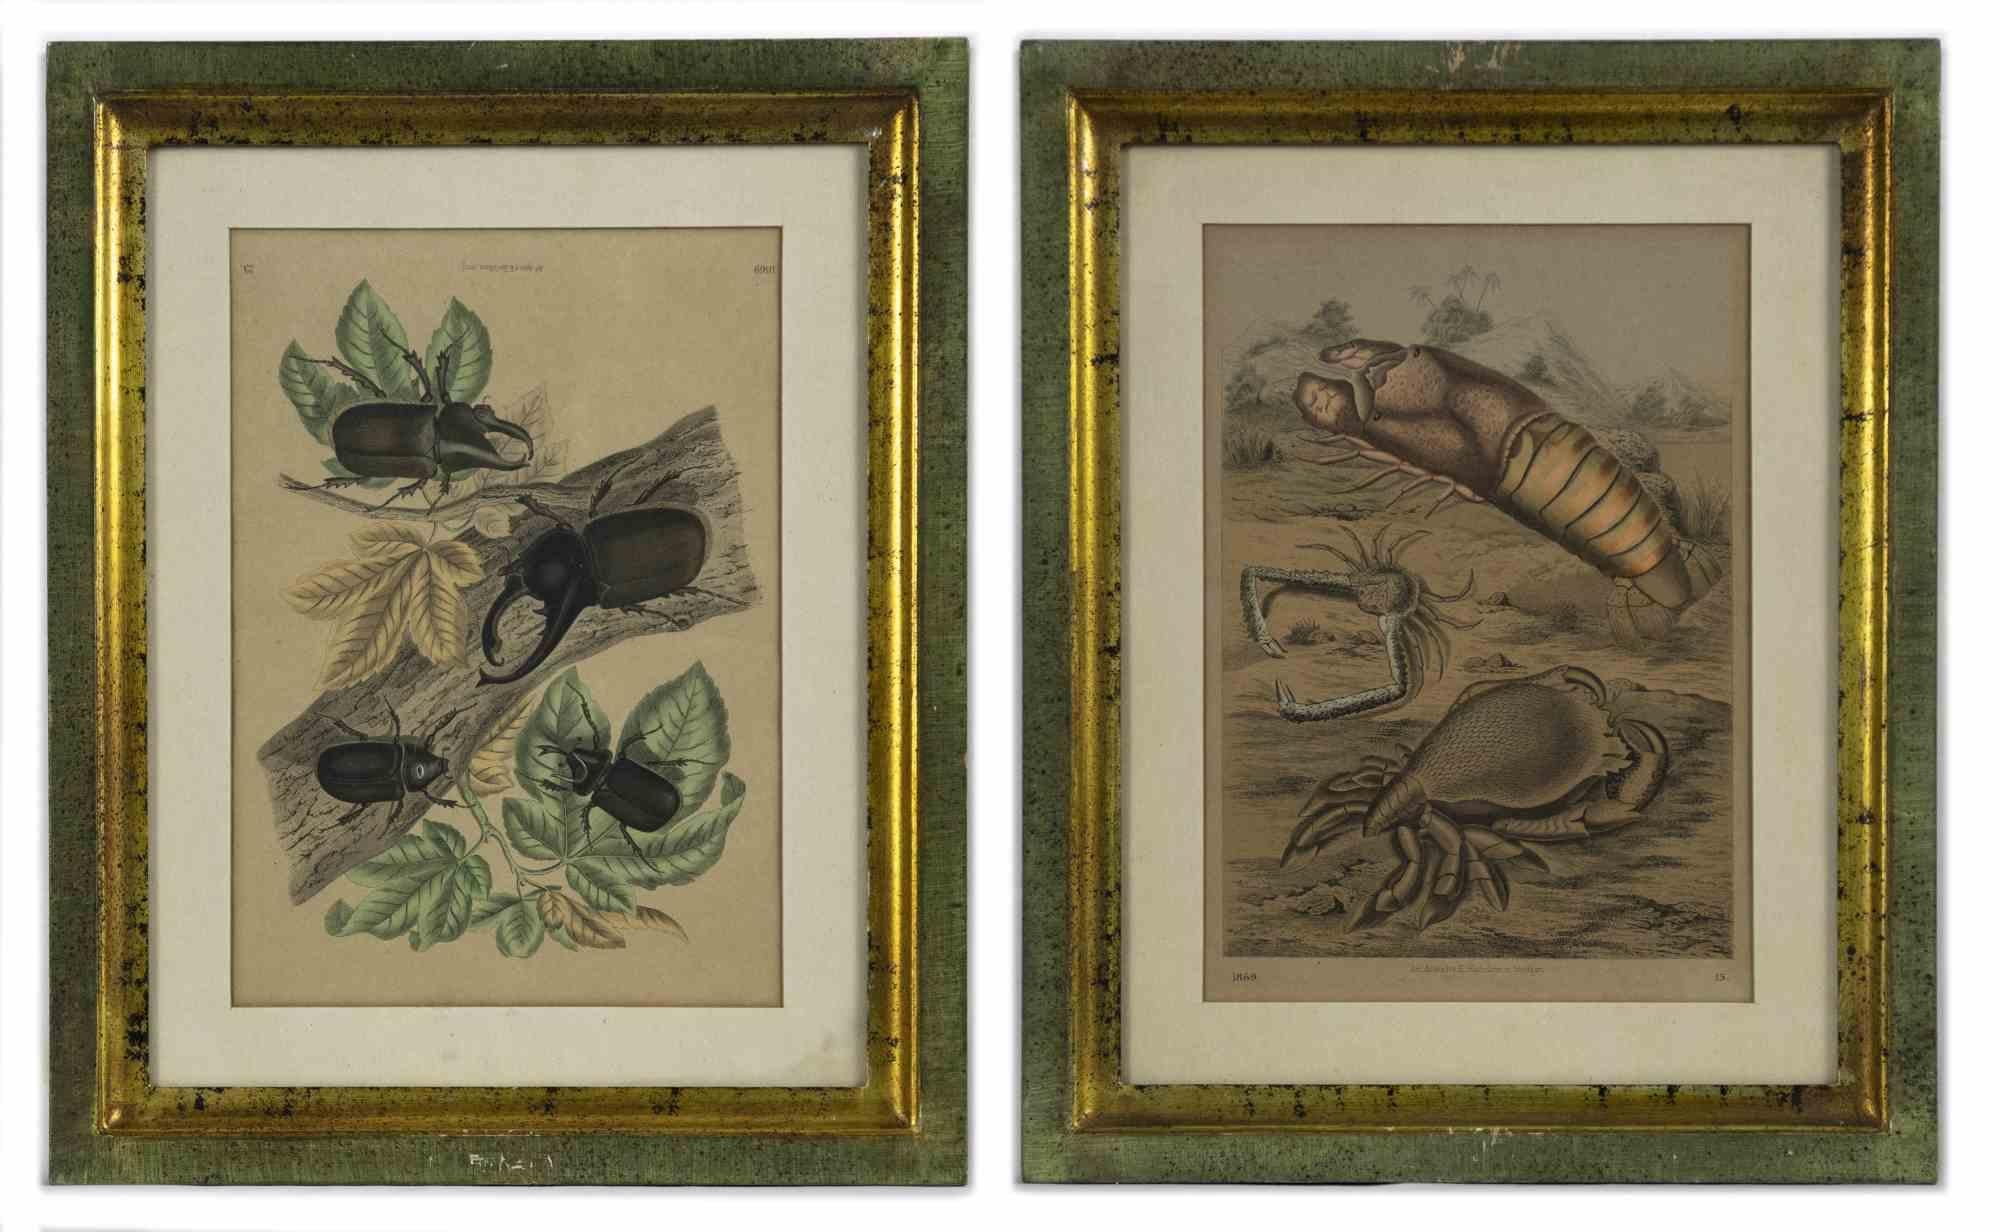 Flora and fauna is an original pair of modern artworks realized in 1869 by the German atist E. Hochdanz.

Hand watercolored lithograph.

Printed on plate of both artworks: Art Anst.v E.Hochdanz. Dated on lower left and number of plate print on lower